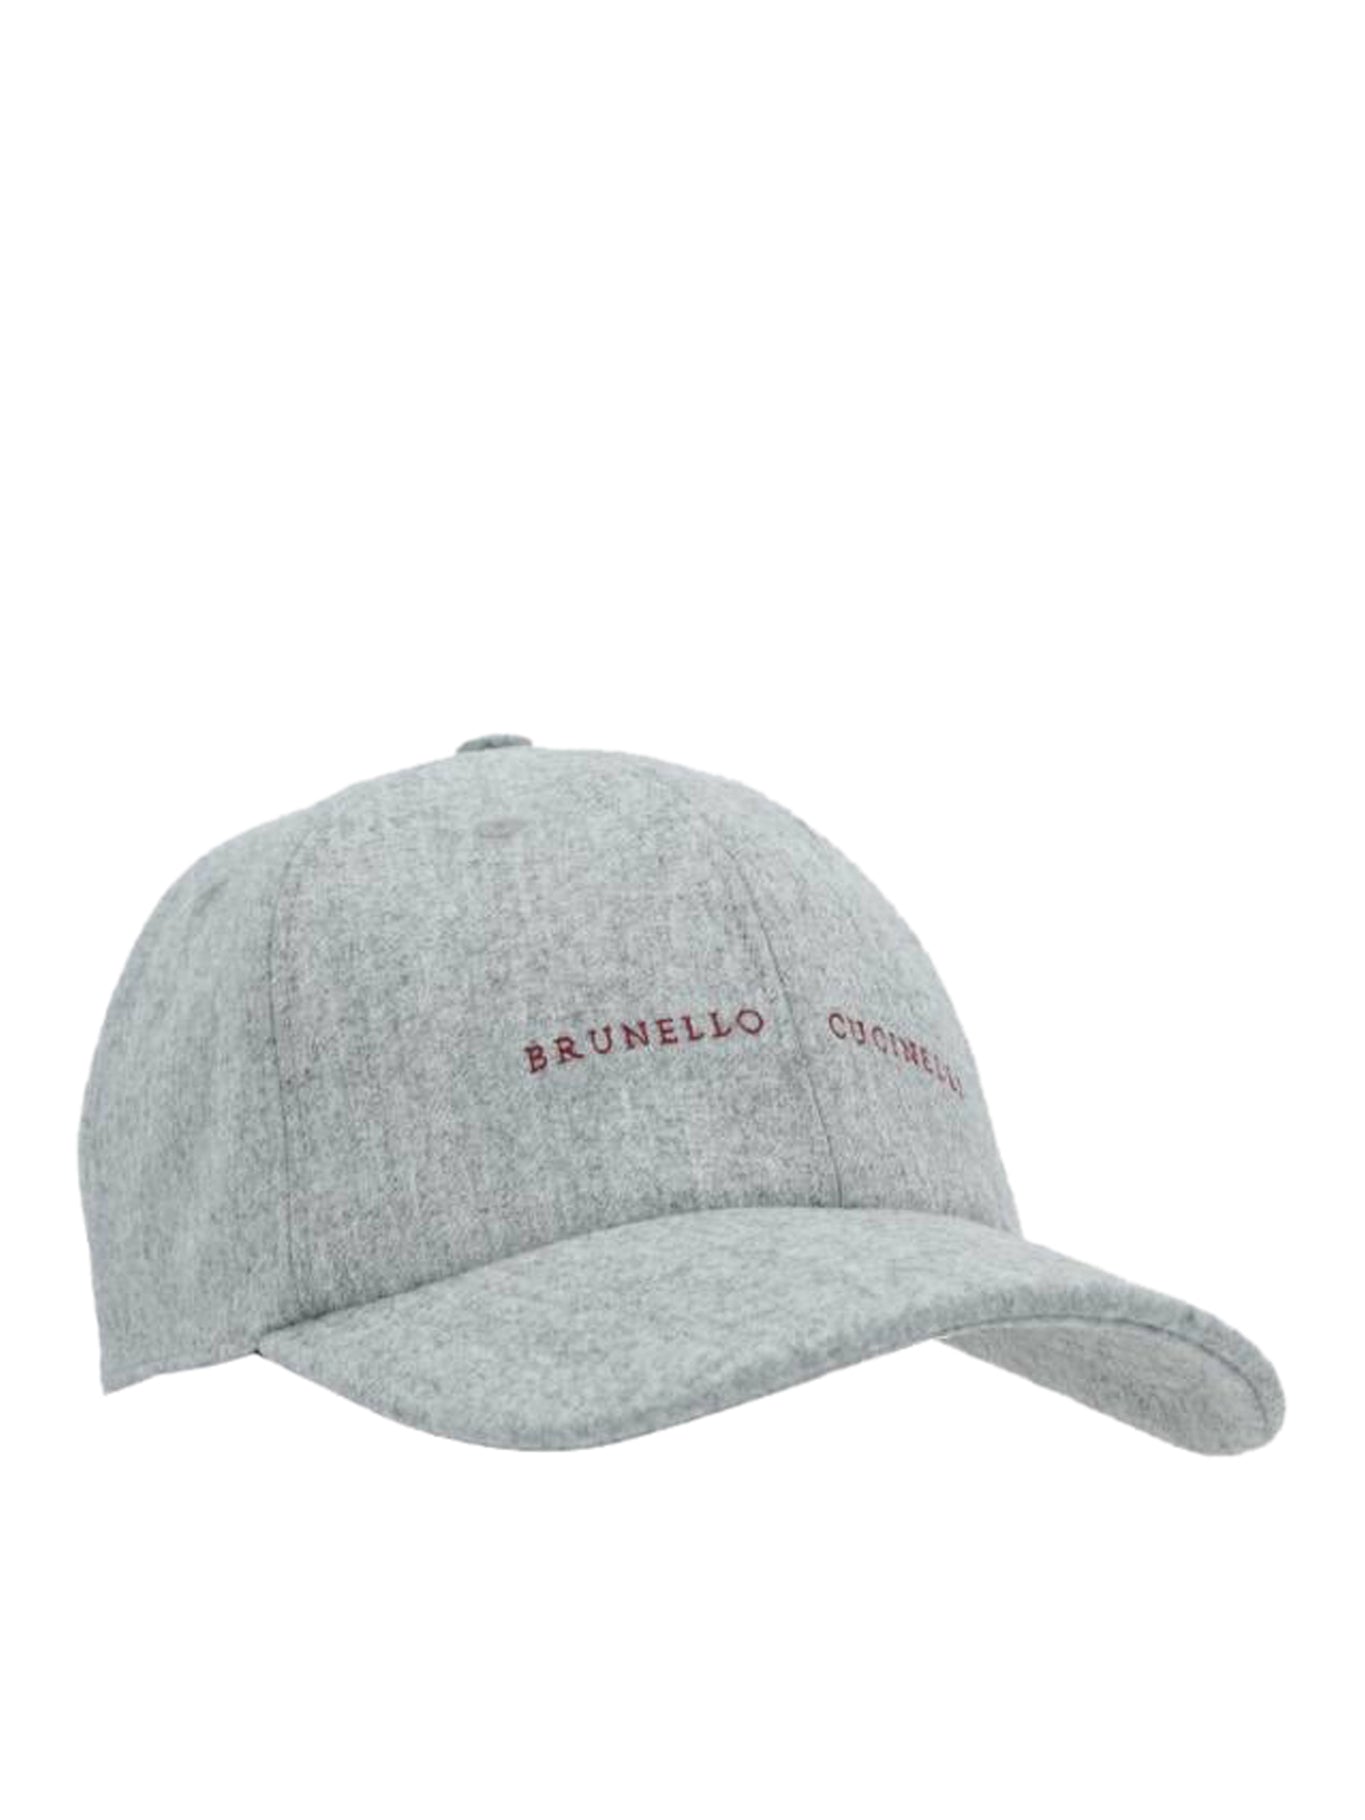 WOOL BASEBALL HAT WITH LOGO EMBROIDERY